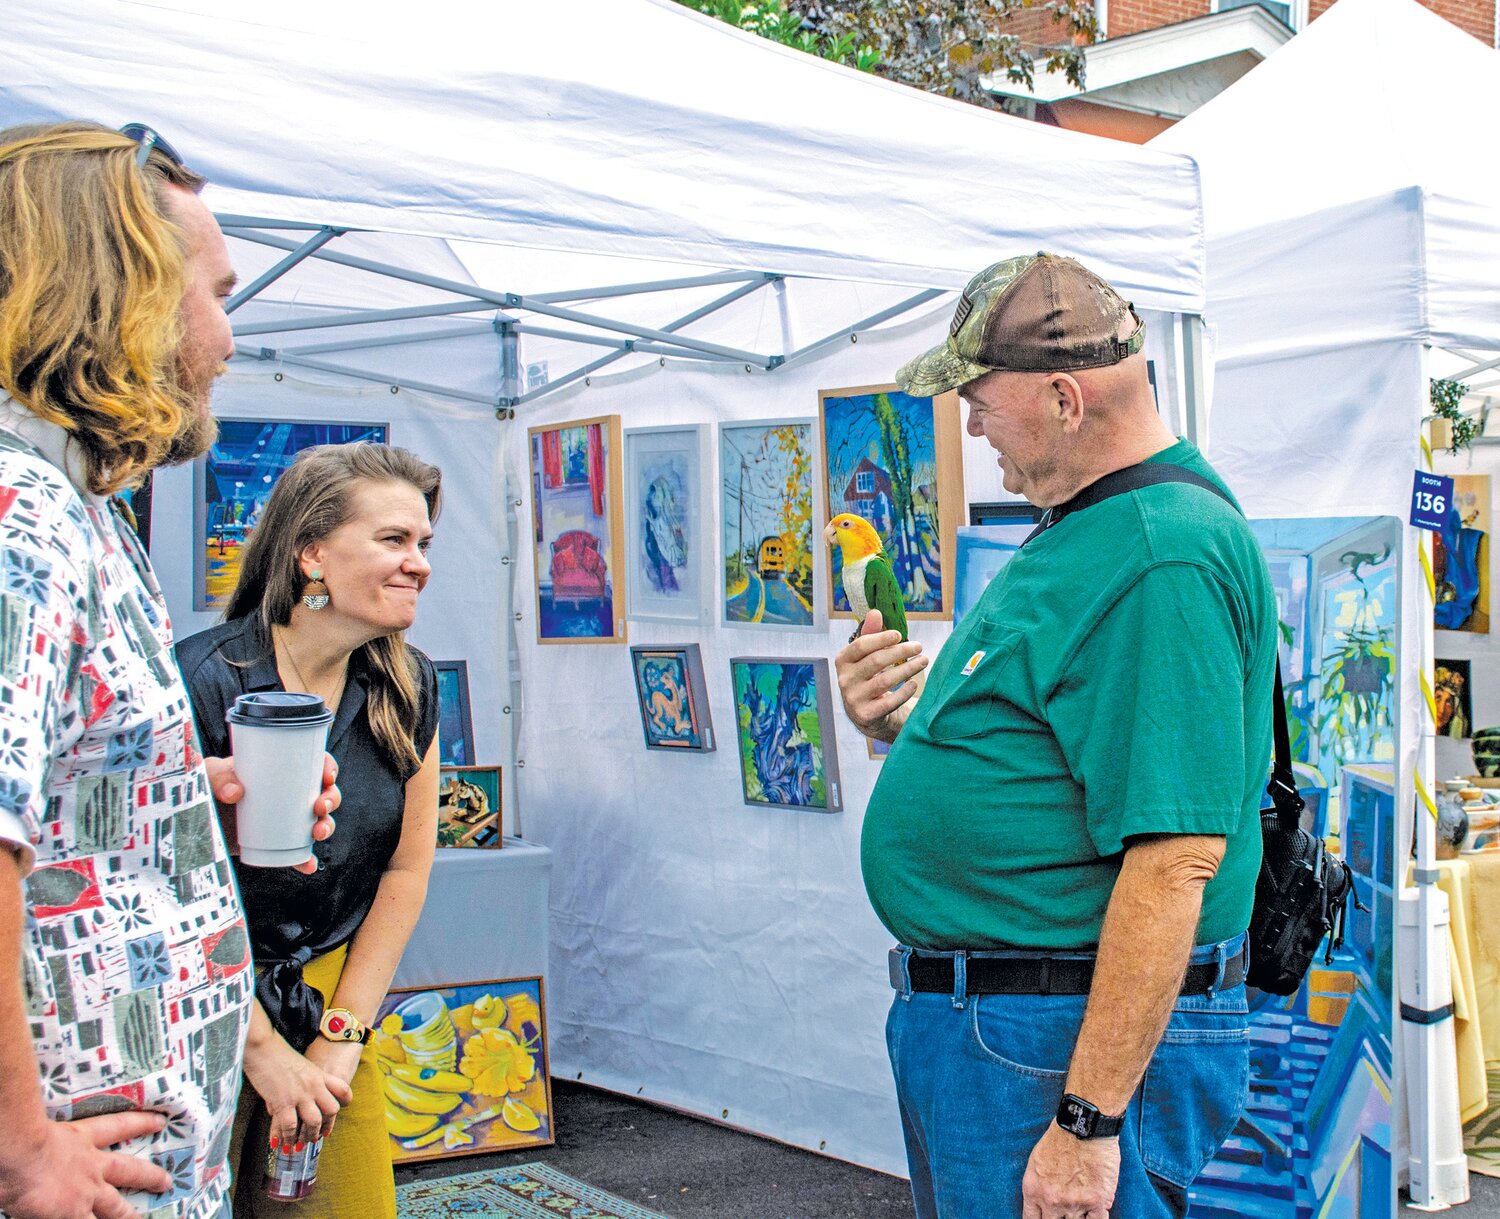 A festival goer and his pet parrot check out various vendors at the Doylestown Arts Festival.